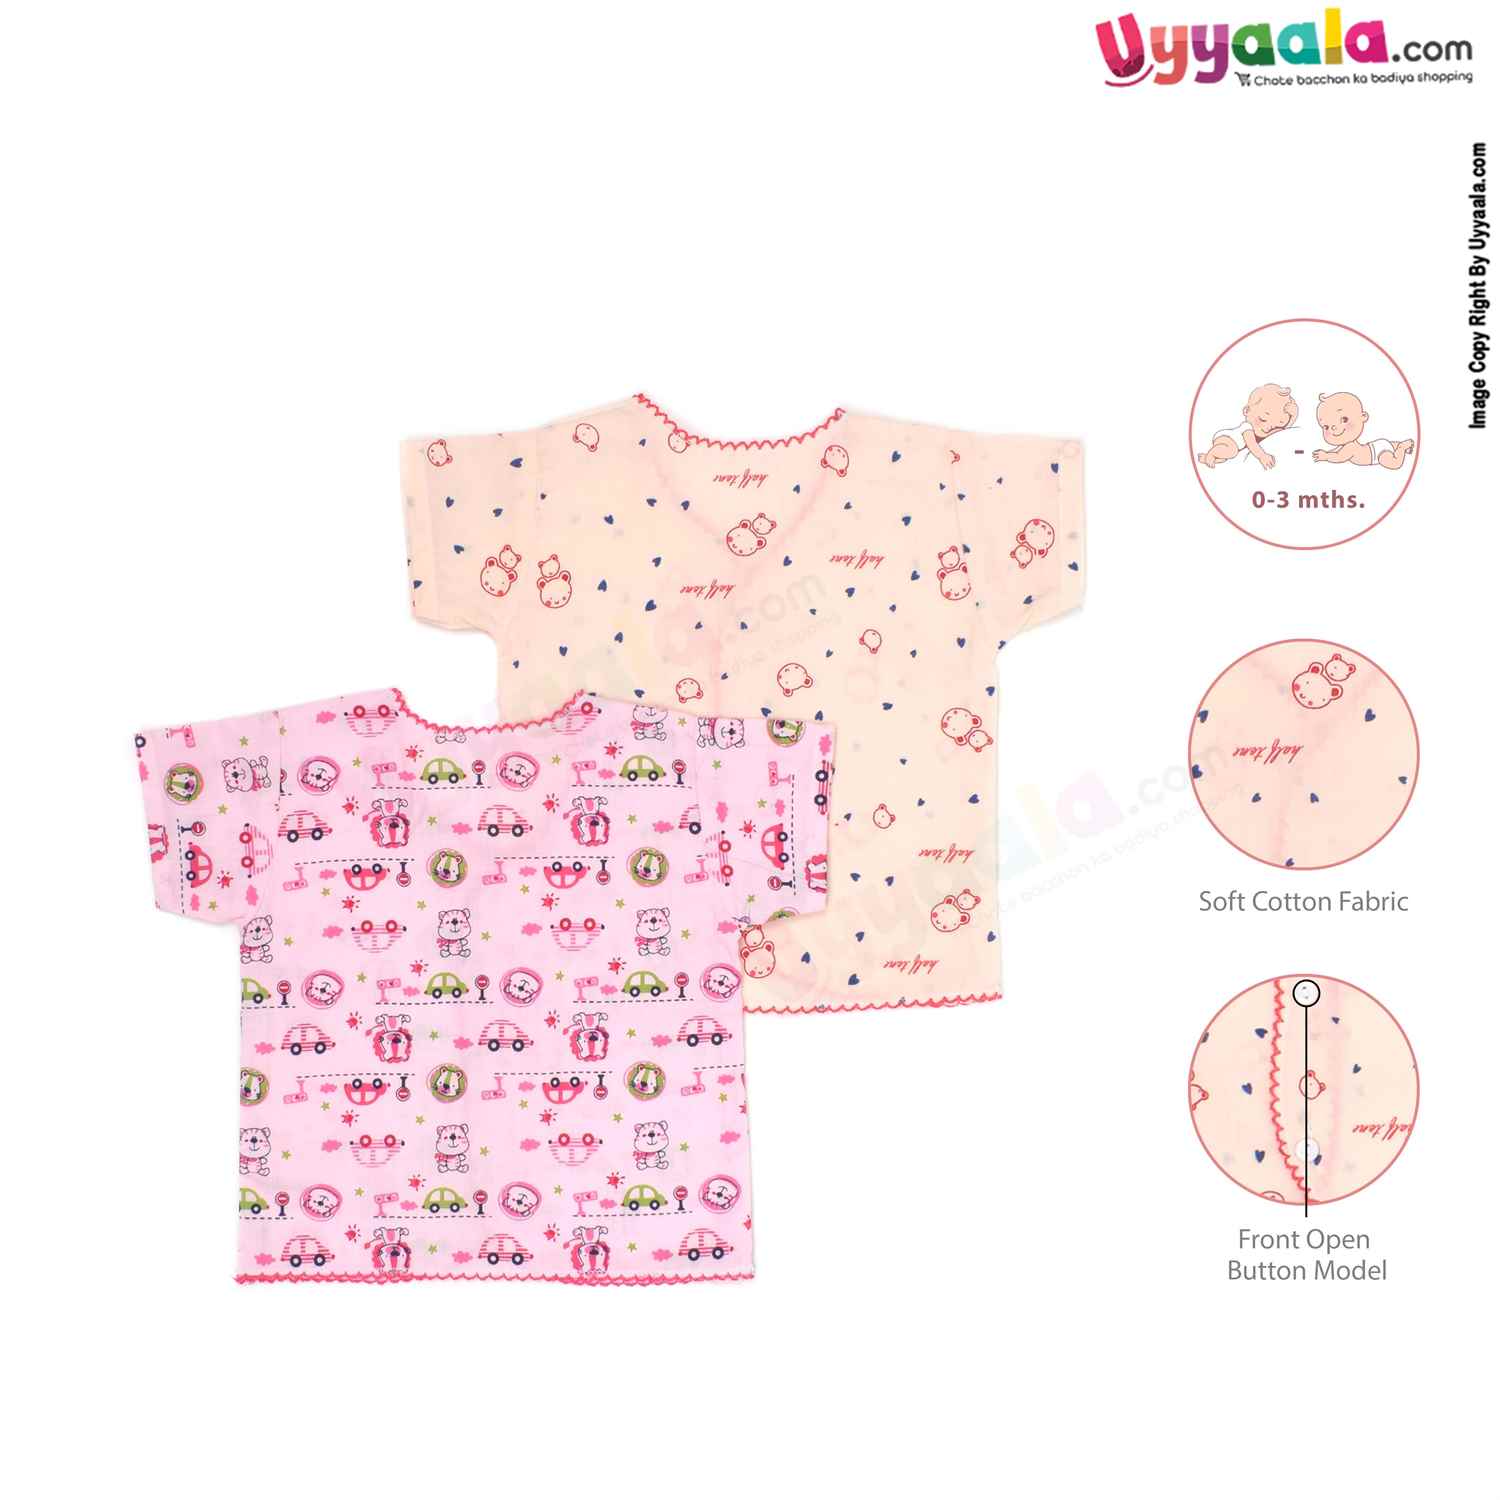 Half Sleeve Baby Jabla Set, Front Opening Button Model, Premium Quality Cotton Baby Wear, Car & Bear Print, (0-3M), 2Pack - Pink & Peach